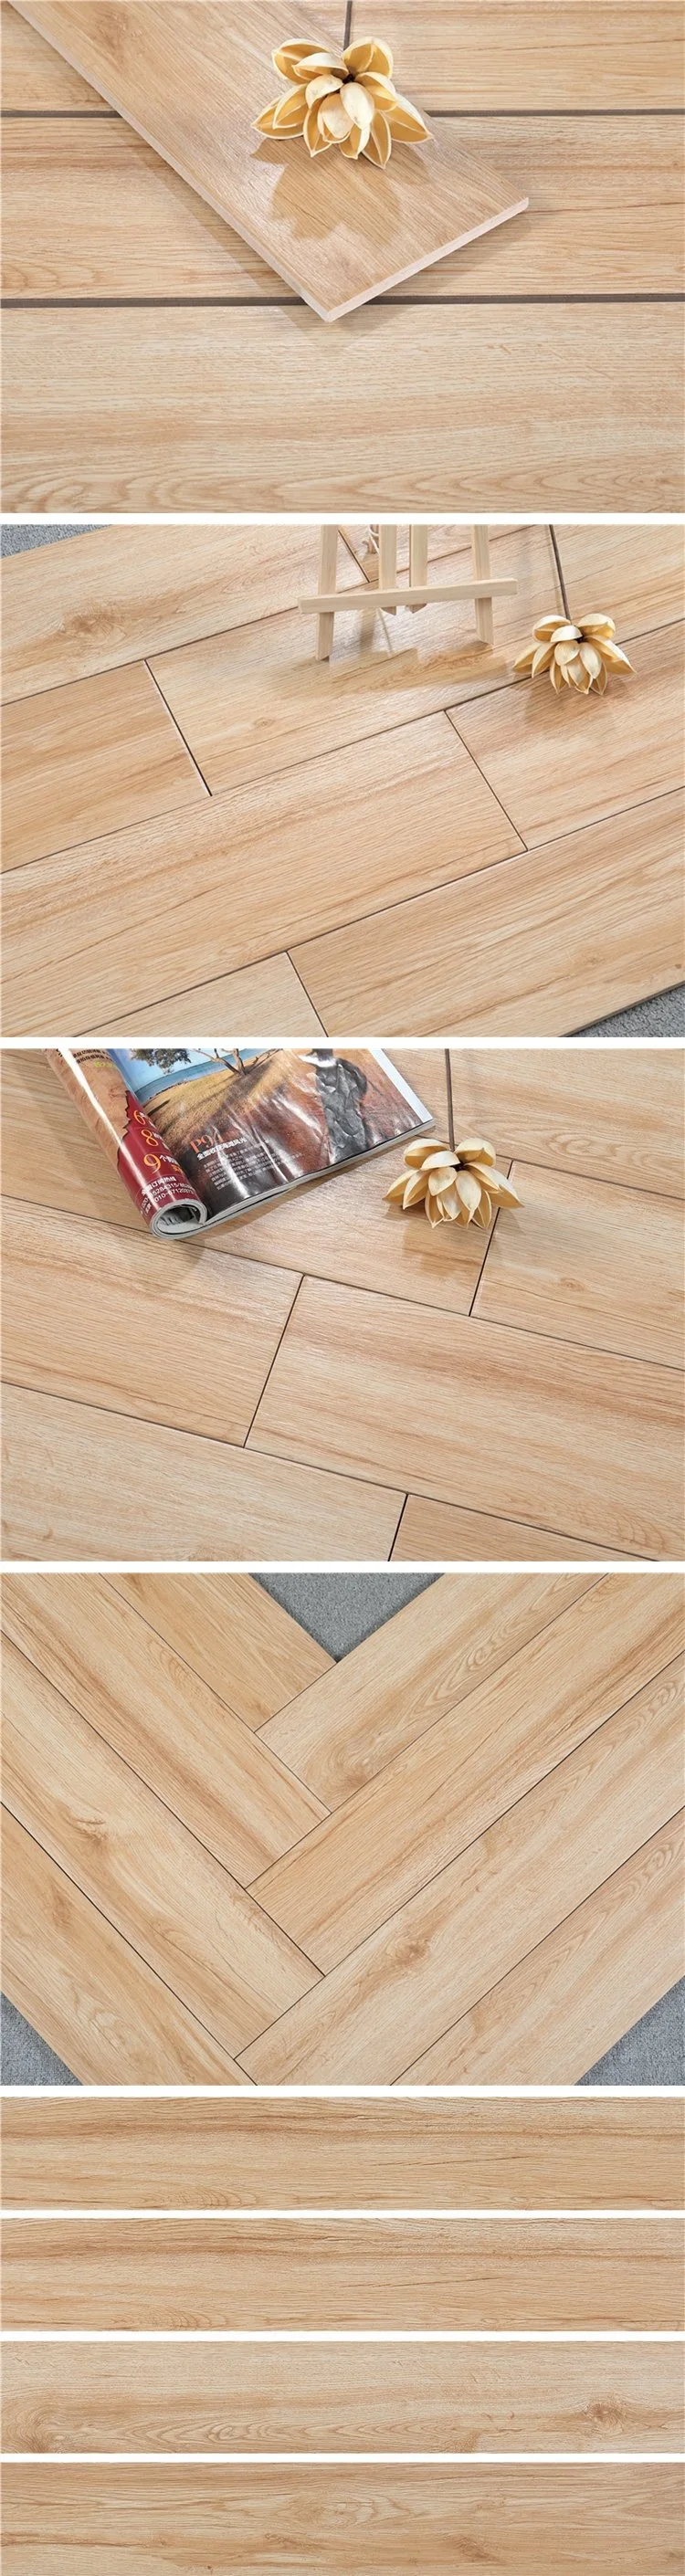 Winchester Prices on Stairs Grain Wood Tile Flooring for Kitchen